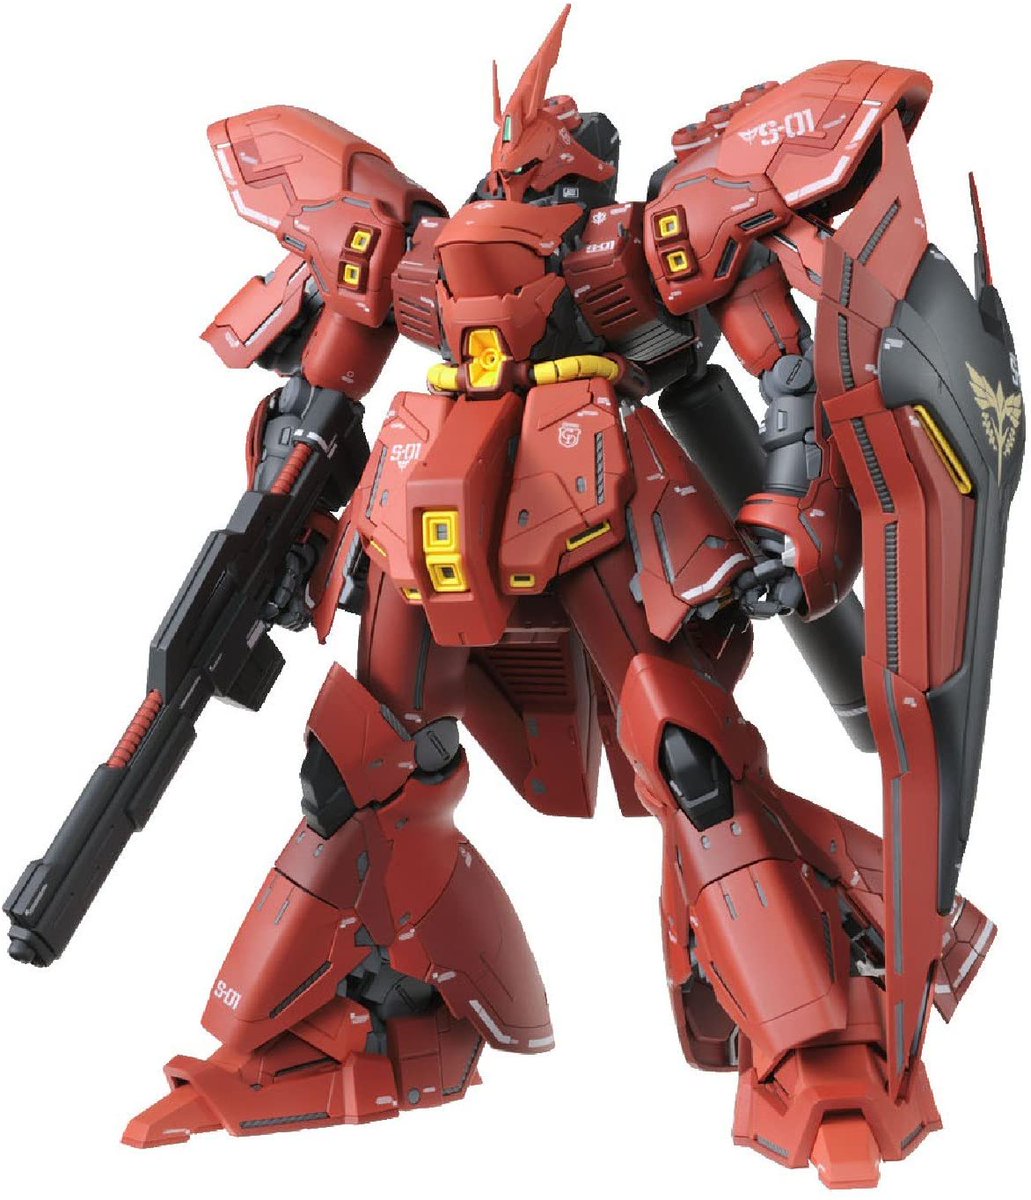 Want something that'll give you a headache but look amazing? Try a Ver. Ka. Master Grade! Redesigns by legendary designer Hajime Katoki are a sight to behold. Here are my faves: Sazabi, an absolute goliath; V2 Assault Buster, fragile but I love it; Full Armor ZZ, Biggest gun!